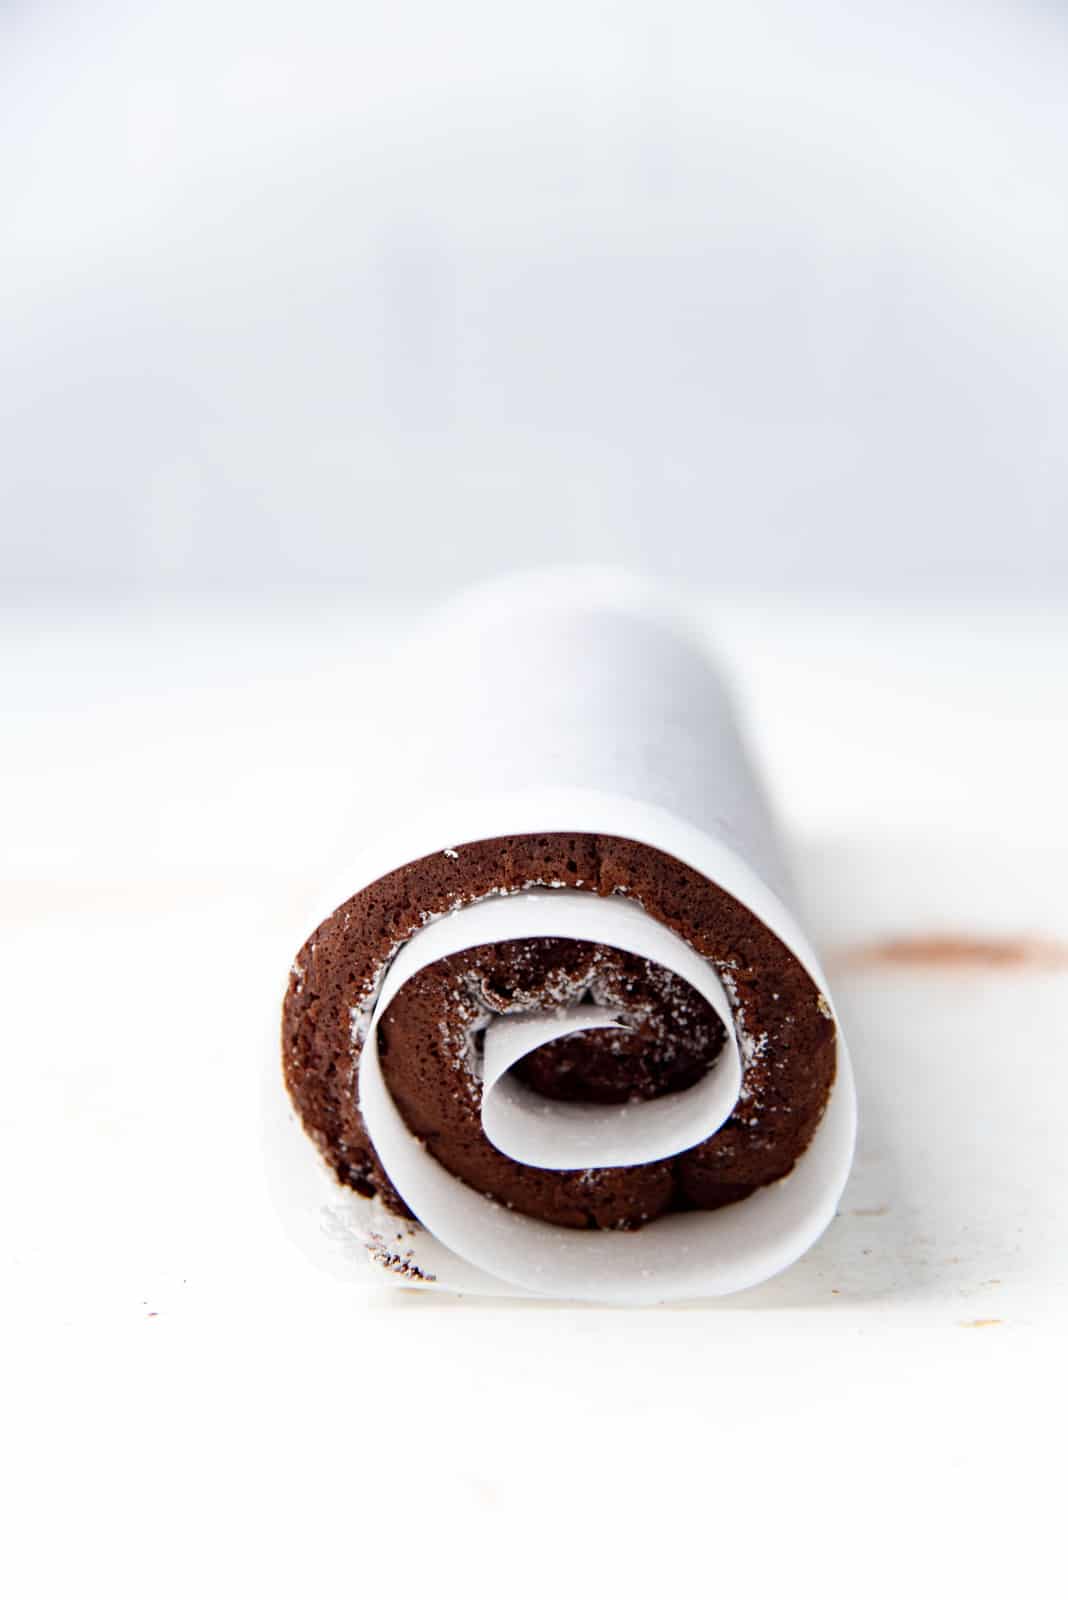 Swiss roll cake rolled up in parchment paper without filling